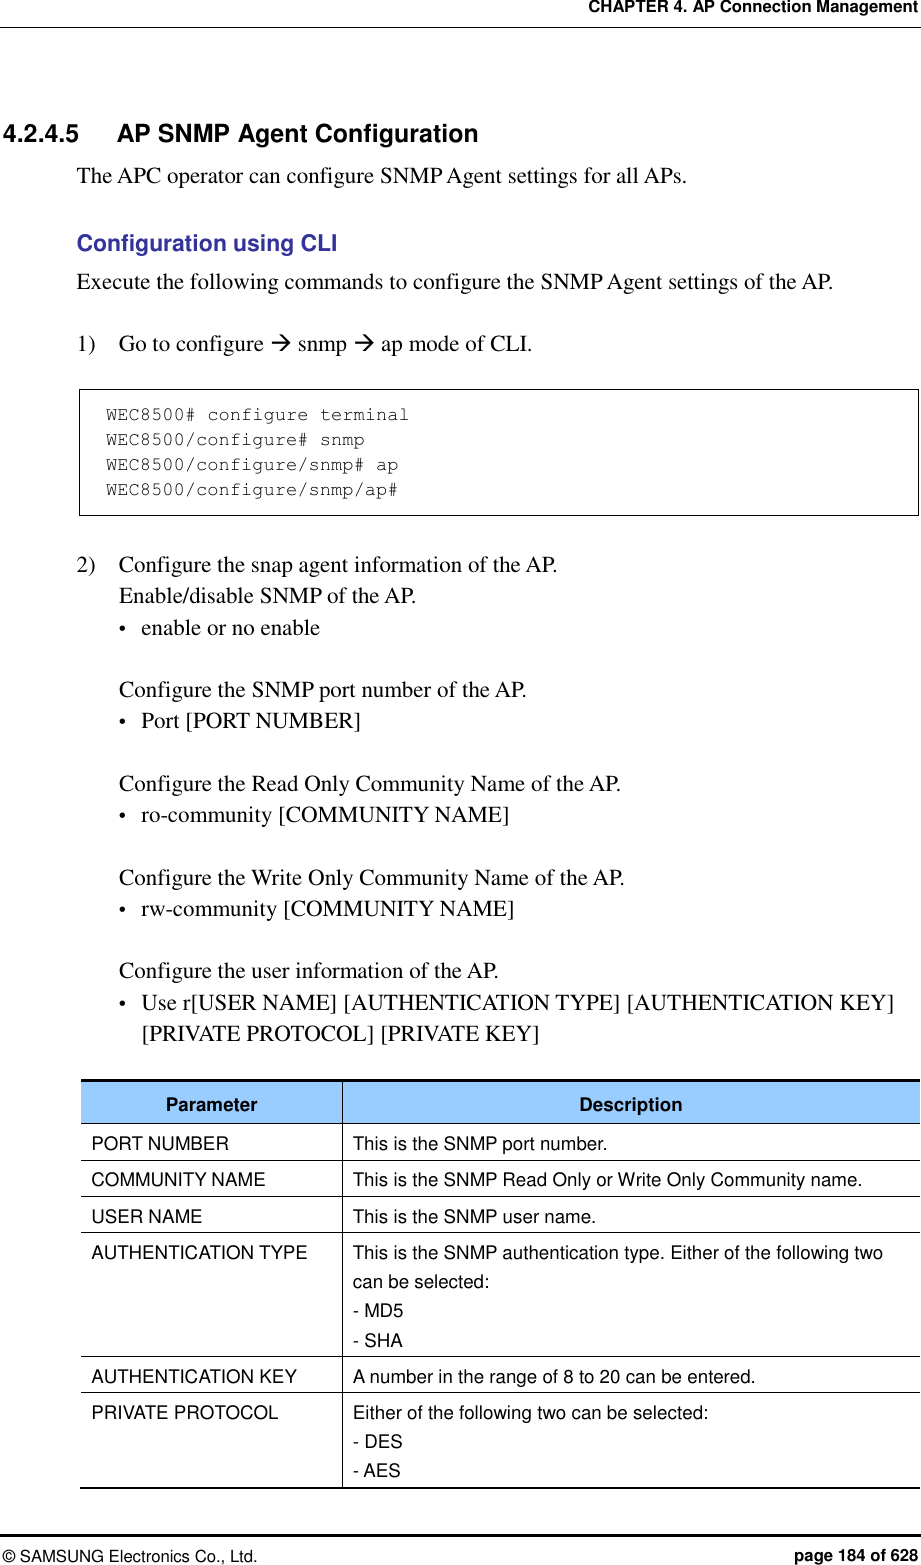 CHAPTER 4. AP Connection Management ©  SAMSUNG Electronics Co., Ltd.  page 184 of 628 4.2.4.5  AP SNMP Agent Configuration The APC operator can configure SNMP Agent settings for all APs.  Configuration using CLI Execute the following commands to configure the SNMP Agent settings of the AP.  1)    Go to configure  snmp  ap mode of CLI.  WEC8500# configure terminal WEC8500/configure# snmp WEC8500/configure/snmp# ap WEC8500/configure/snmp/ap#   2)    Configure the snap agent information of the AP. Enable/disable SNMP of the AP.  enable or no enable  Configure the SNMP port number of the AP.    Port [PORT NUMBER]  Configure the Read Only Community Name of the AP.  ro-community [COMMUNITY NAME]  Configure the Write Only Community Name of the AP.  rw-community [COMMUNITY NAME]  Configure the user information of the AP.    Use r[USER NAME] [AUTHENTICATION TYPE] [AUTHENTICATION KEY] [PRIVATE PROTOCOL] [PRIVATE KEY]  Parameter Description PORT NUMBER This is the SNMP port number. COMMUNITY NAME This is the SNMP Read Only or Write Only Community name. USER NAME This is the SNMP user name. AUTHENTICATION TYPE This is the SNMP authentication type. Either of the following two can be selected: - MD5 - SHA AUTHENTICATION KEY A number in the range of 8 to 20 can be entered. PRIVATE PROTOCOL Either of the following two can be selected: - DES - AES 